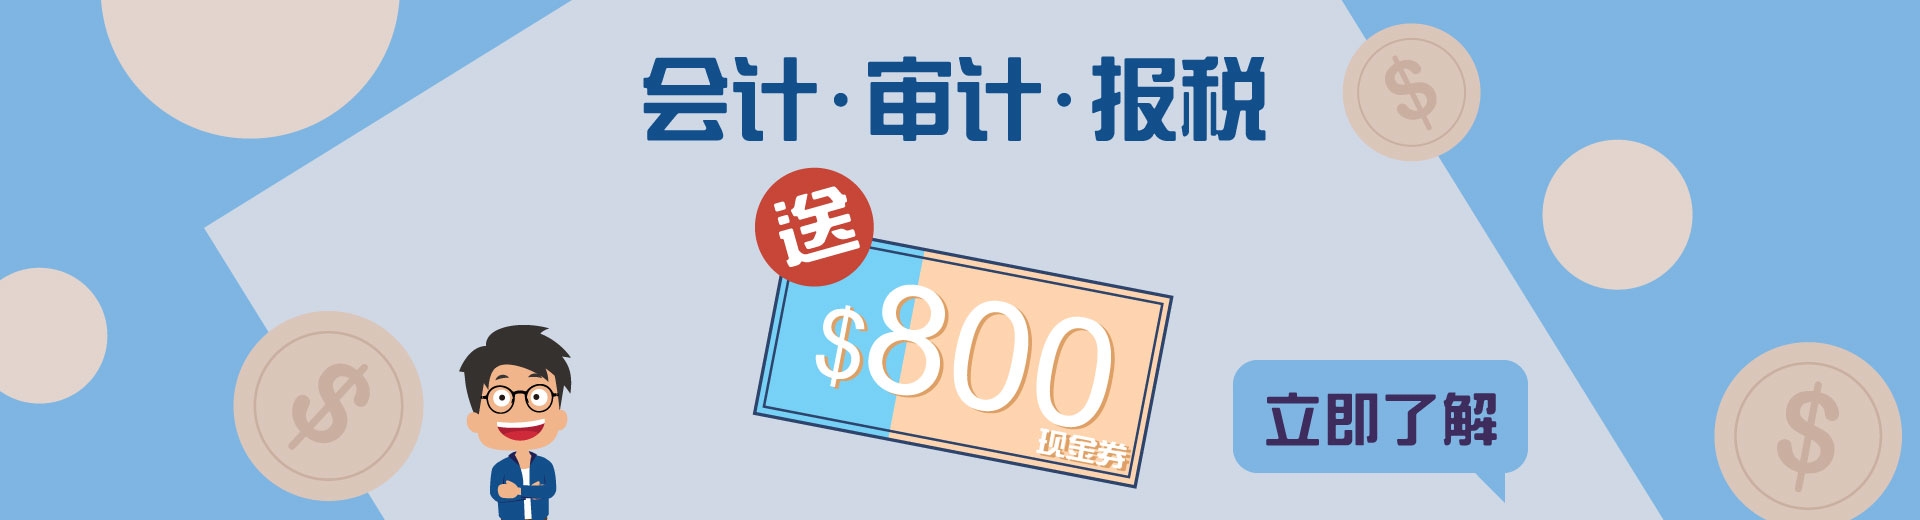 accounting, auditing, taxation services with $800 supermarket cash voucher